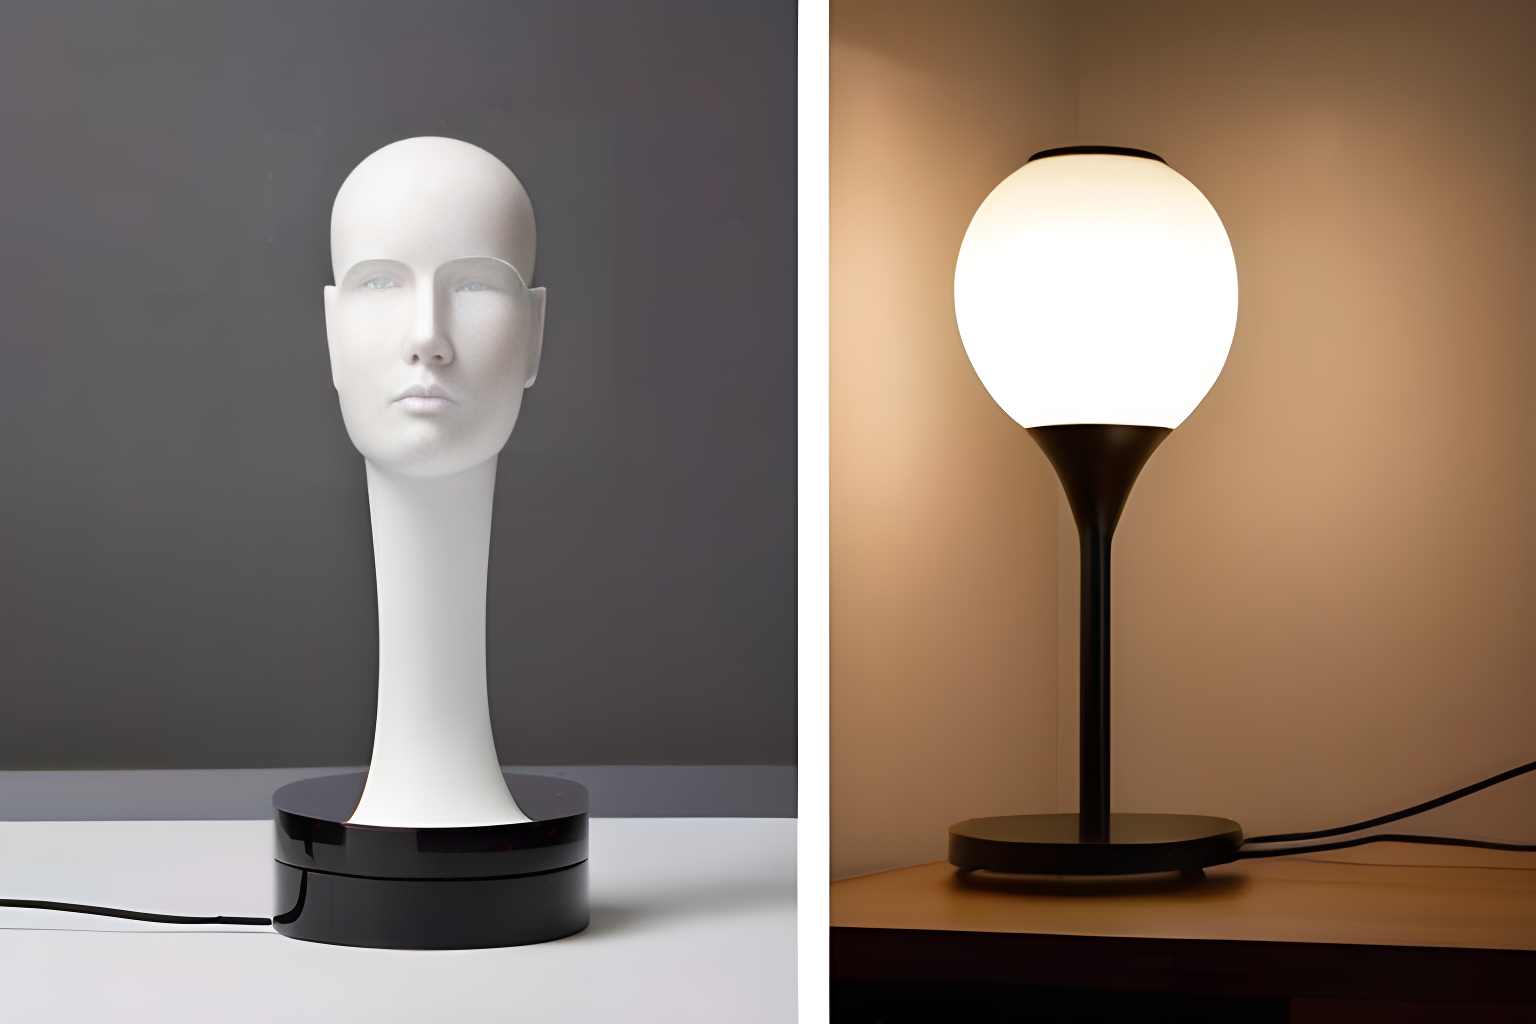 A humanoid sculpture that doubles as a lamp